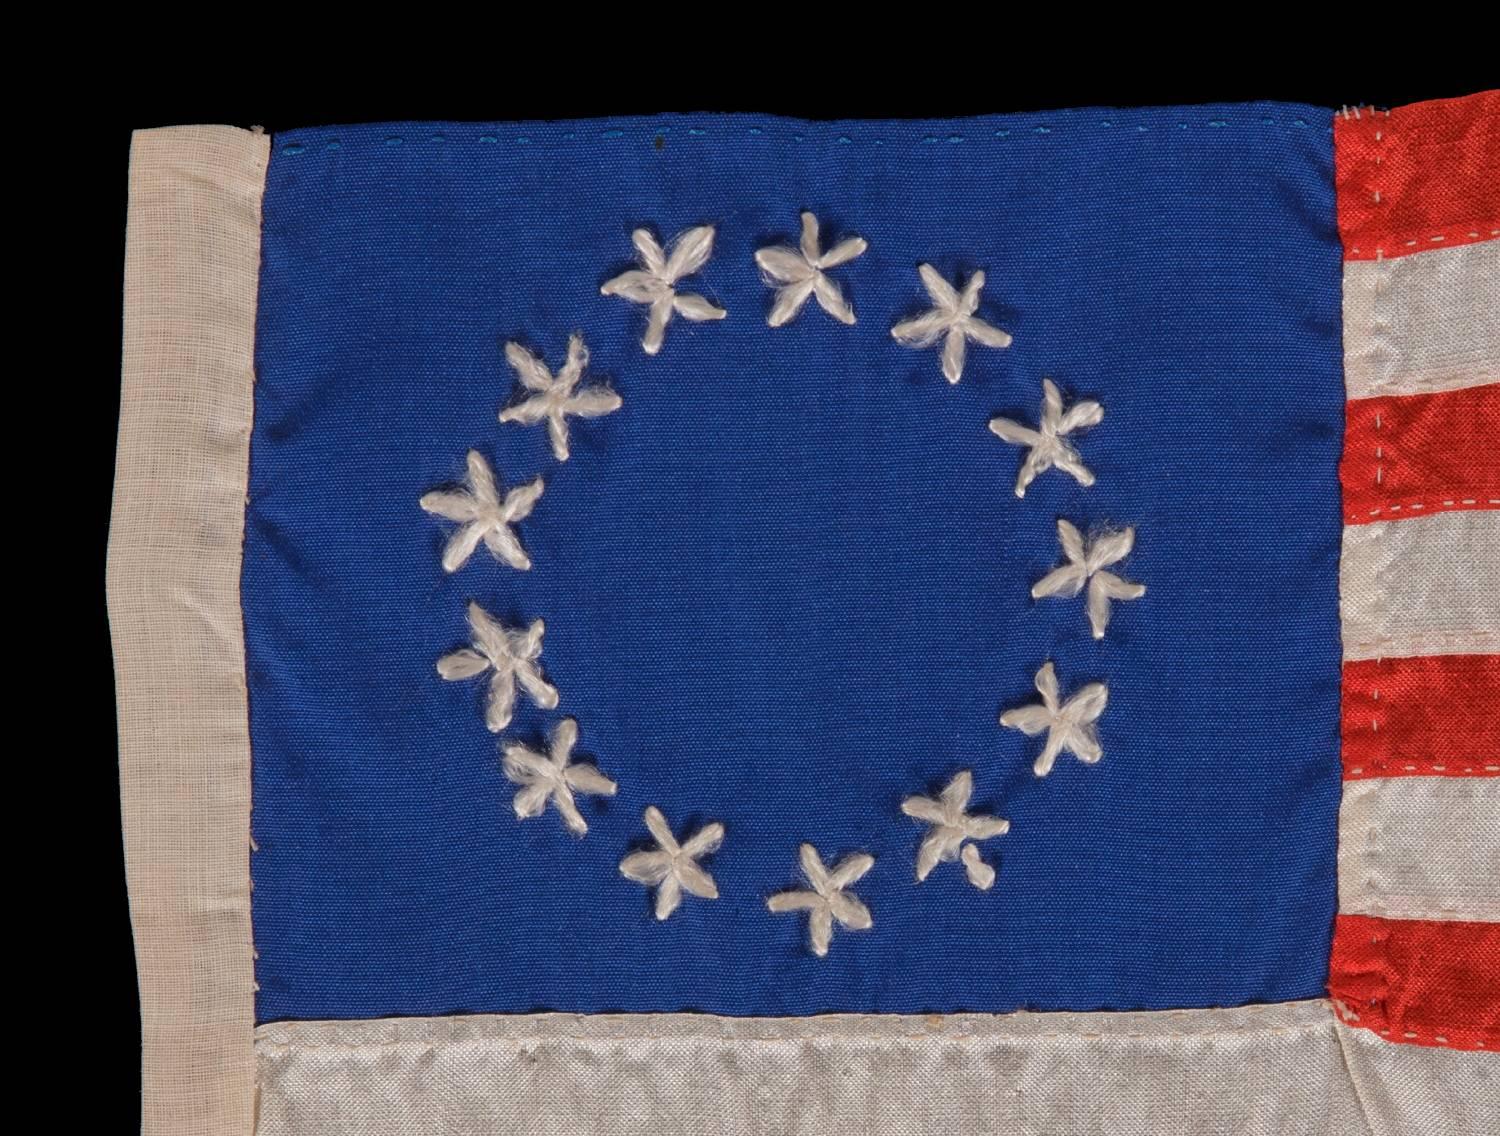 13 hand-embroidered stars and expertly hand-sewn stripes on an antique American flag made in Philadelphia in by Rachel Albright or Sarah M. Wilson, granddaughter and great granddaughter of Betsy Ross, 1898-1913:

13 star American national flag,